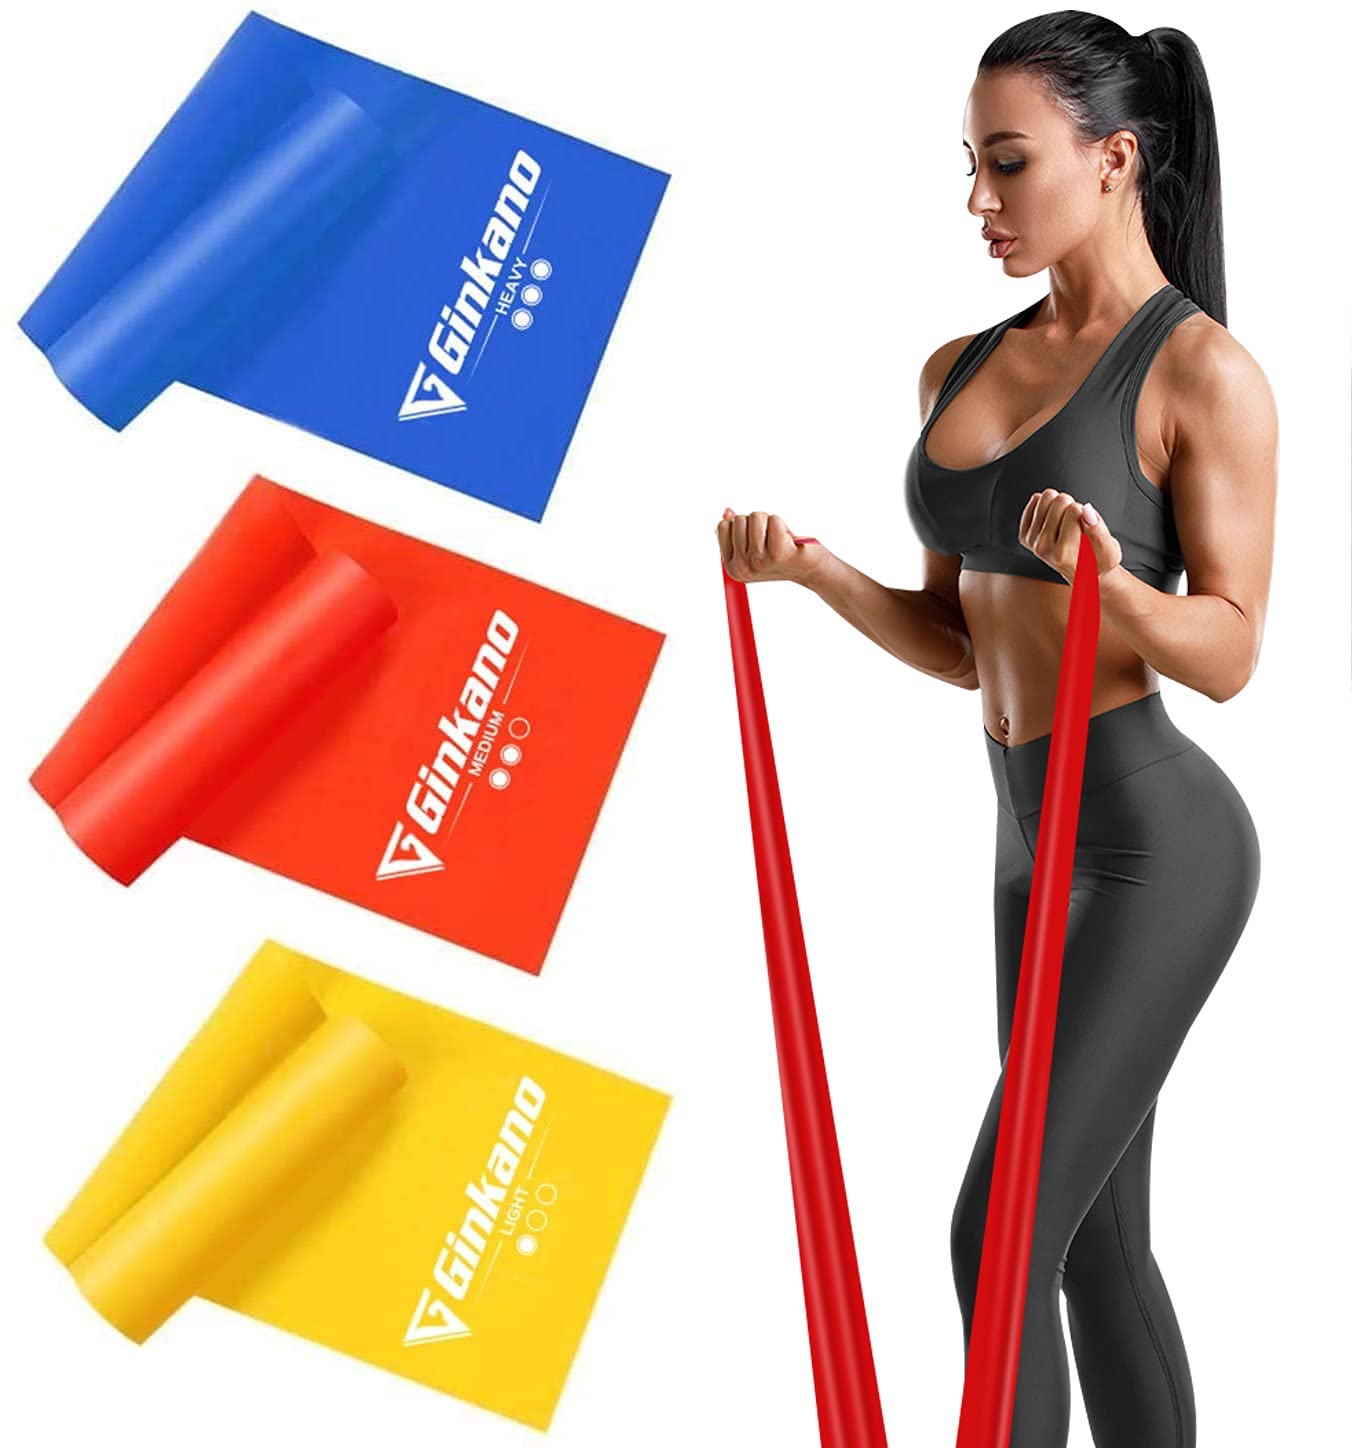 Haquno 3 Pack Exercise Resistance Bands; Set with 3 Resistance Levels;1.8M Exercise Bands Resistance for Women and Men. Ideal for Strength Training, Yoga, Pilates